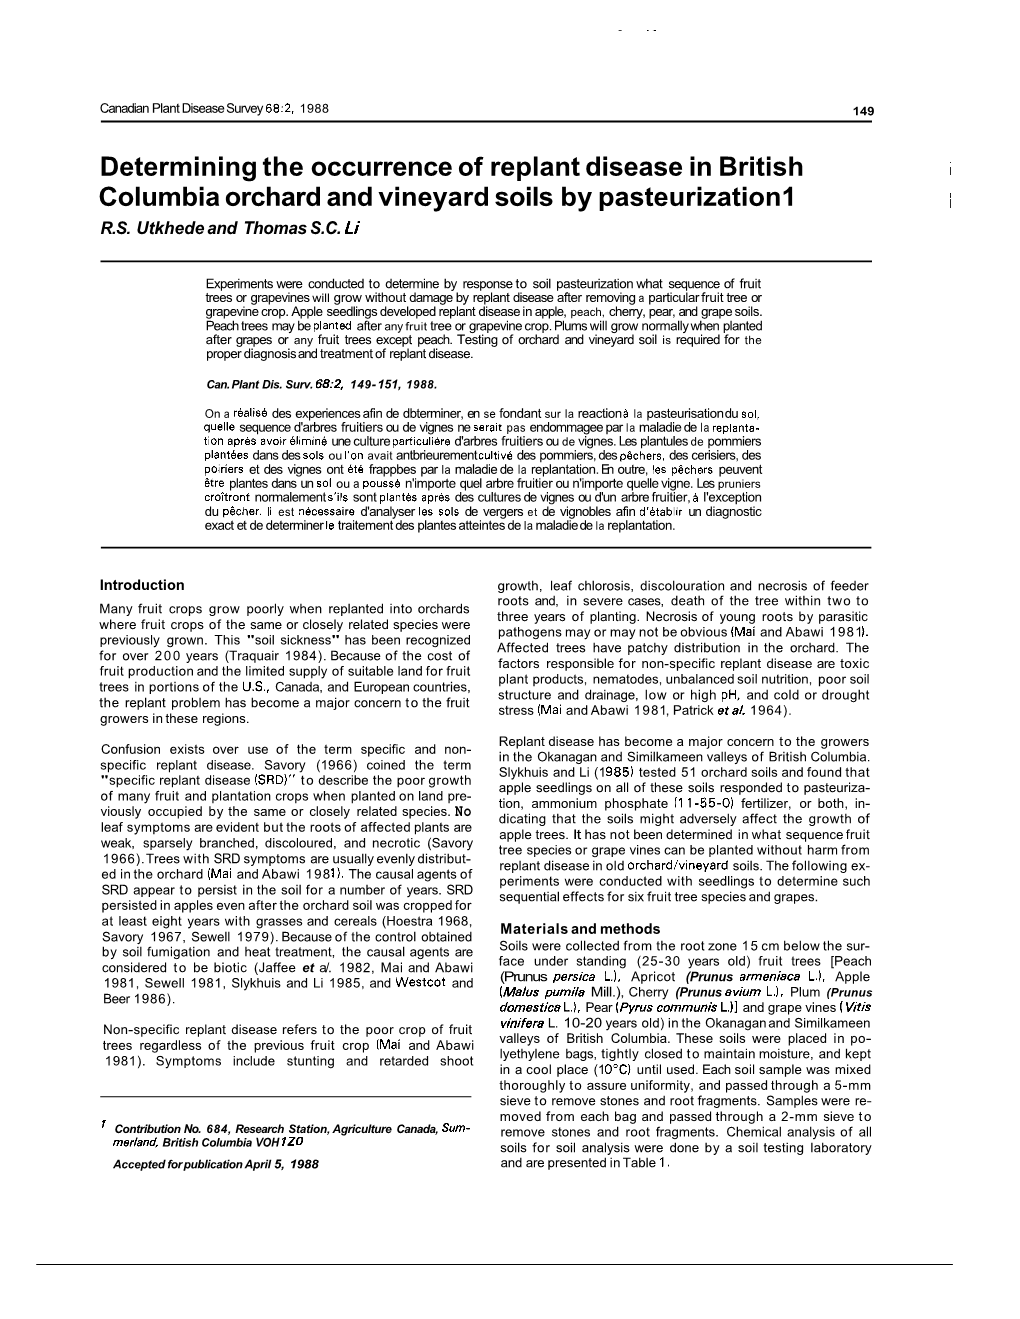 Determining the Occurrence of Replant Disease in British Columbia Orchard and Vineyard Soils by Pasteurization1 R.S